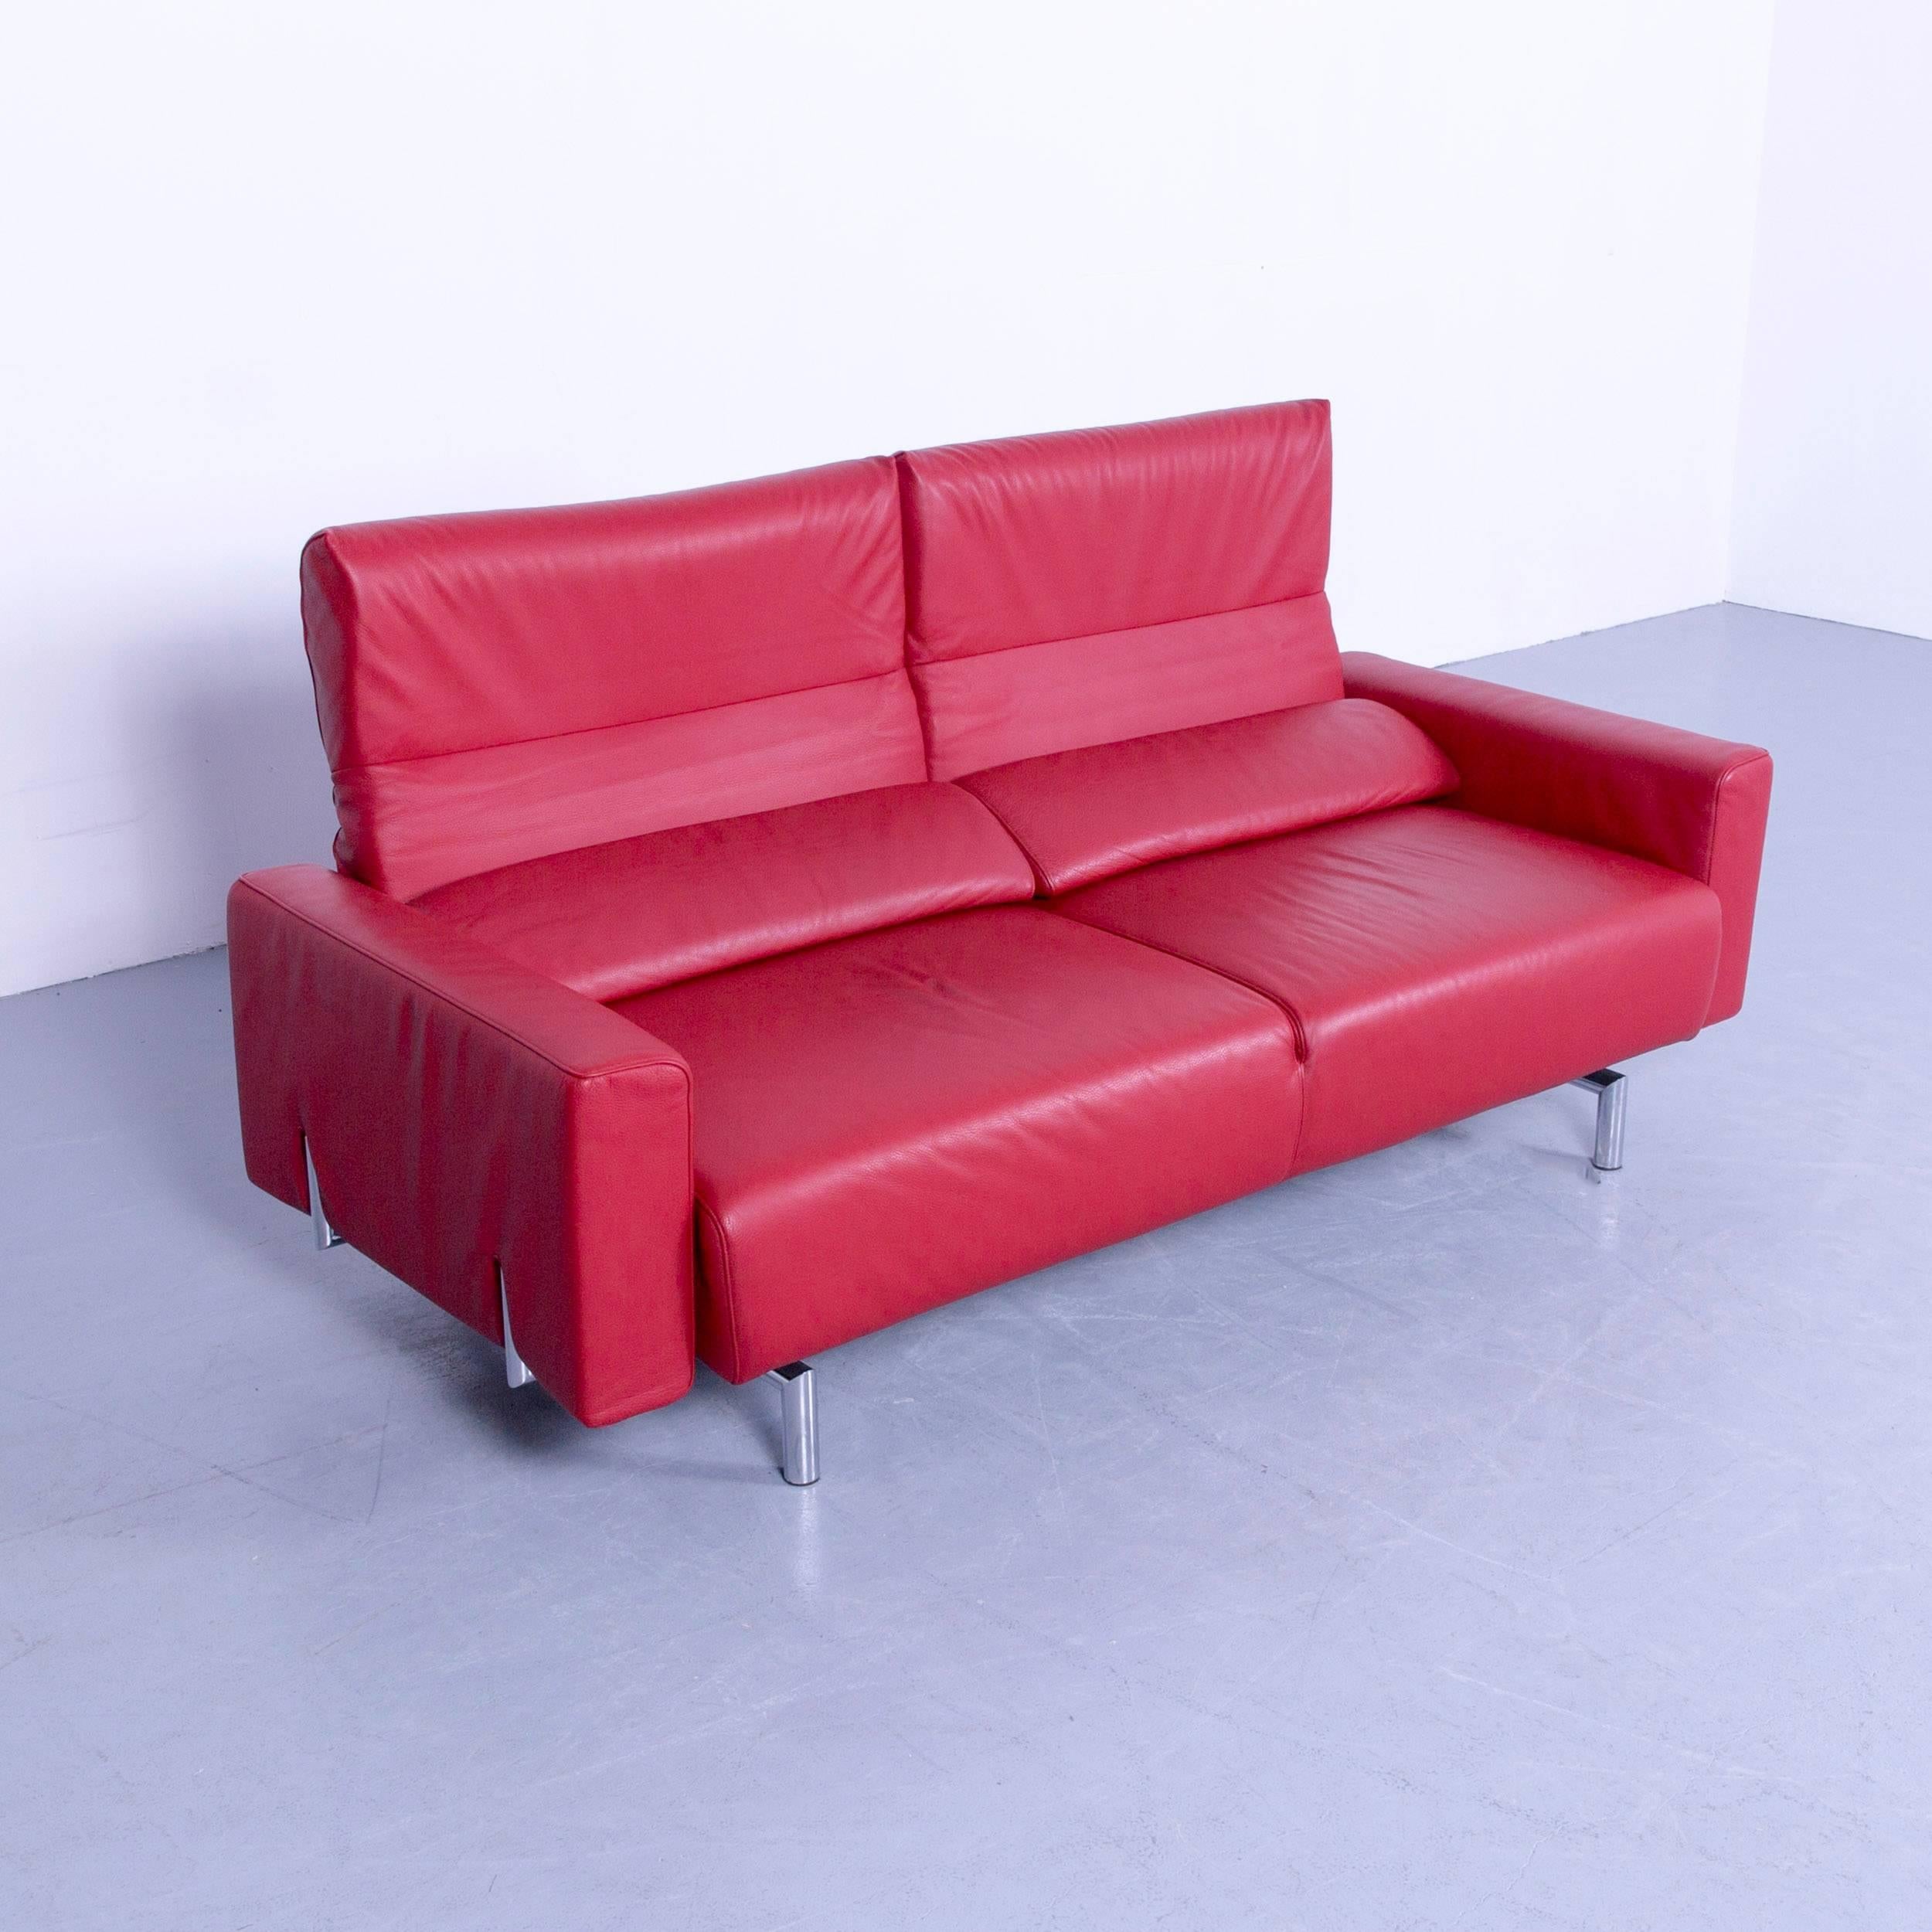 Strässle Matteo Designer Sofa Leather Red Relax Function Two-Seat Modern In Good Condition For Sale In Cologne, DE